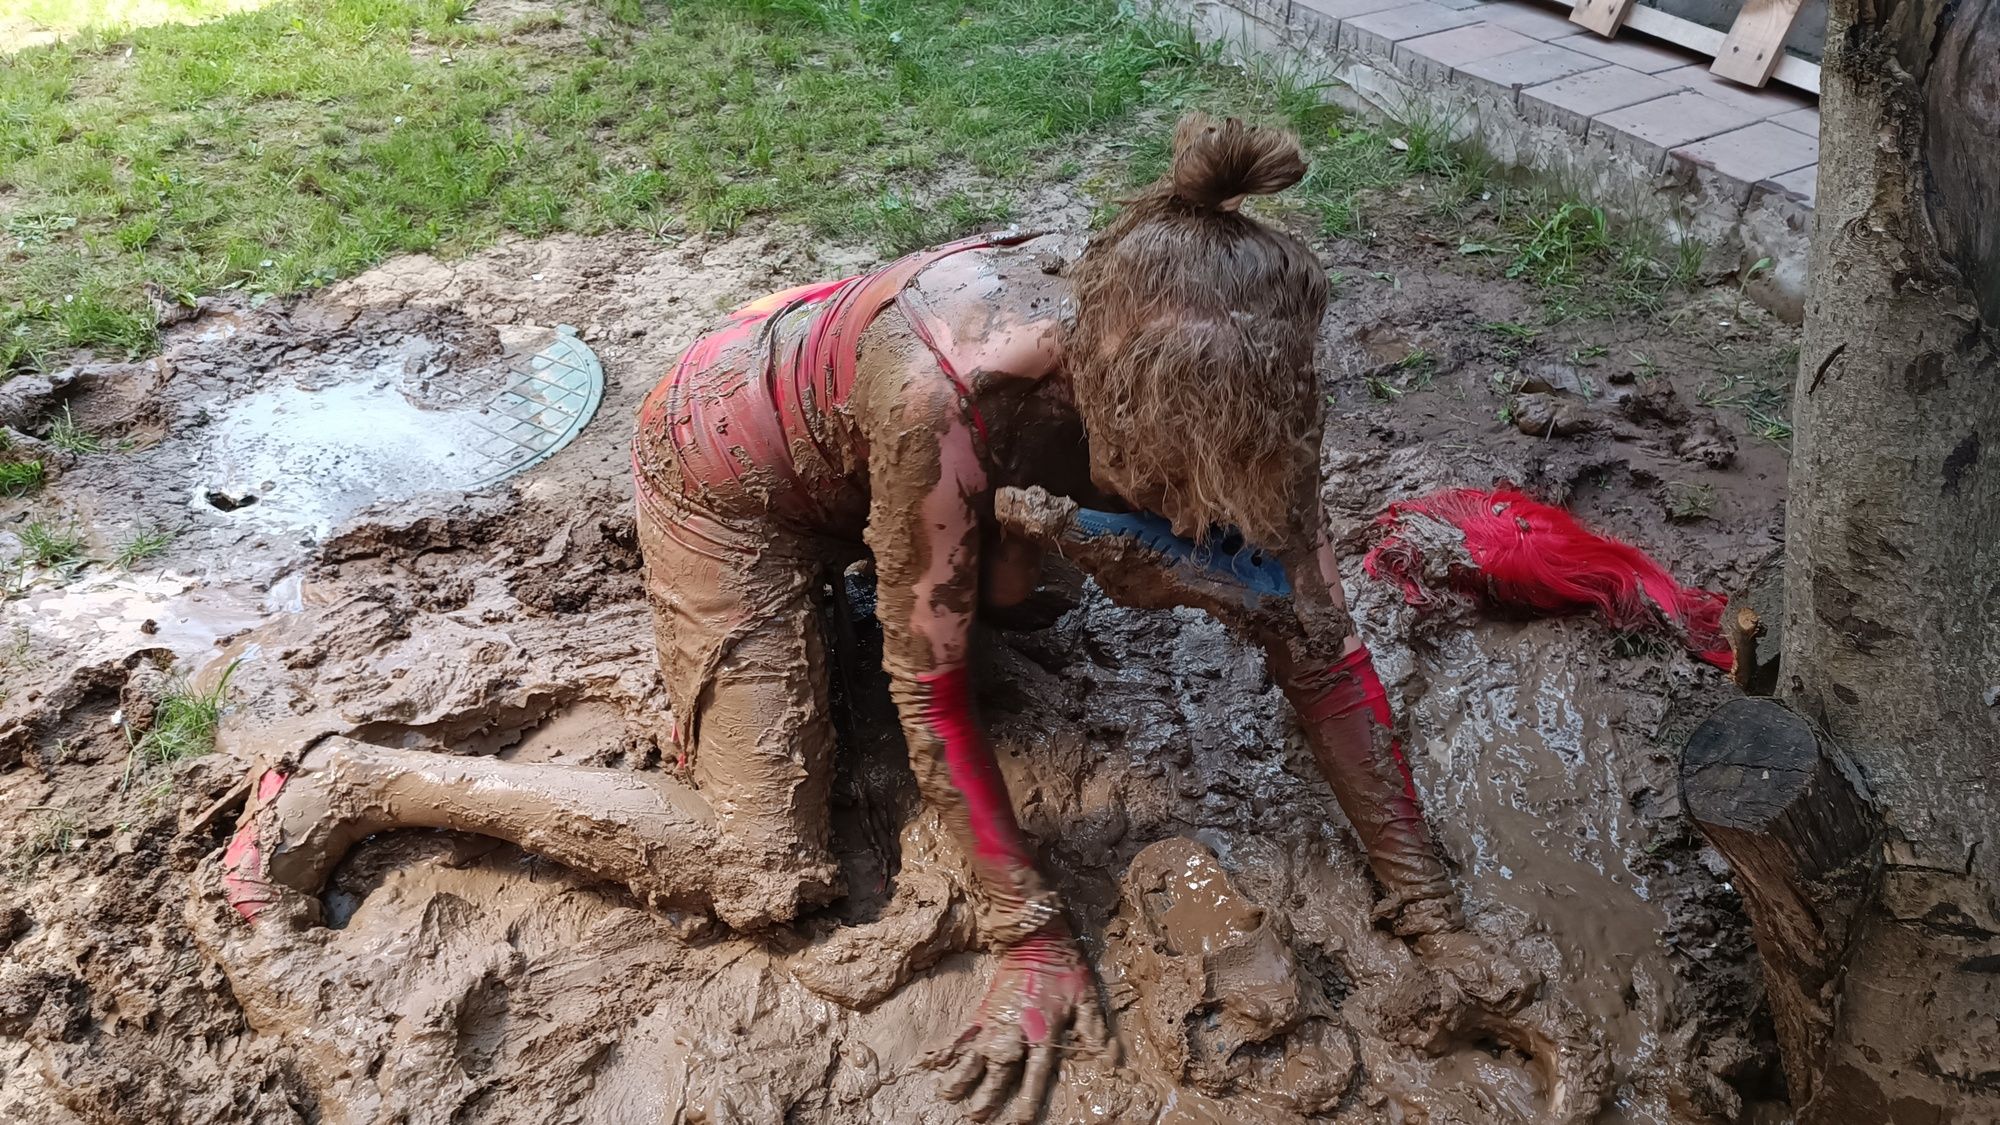 Glamour lady in mud #30